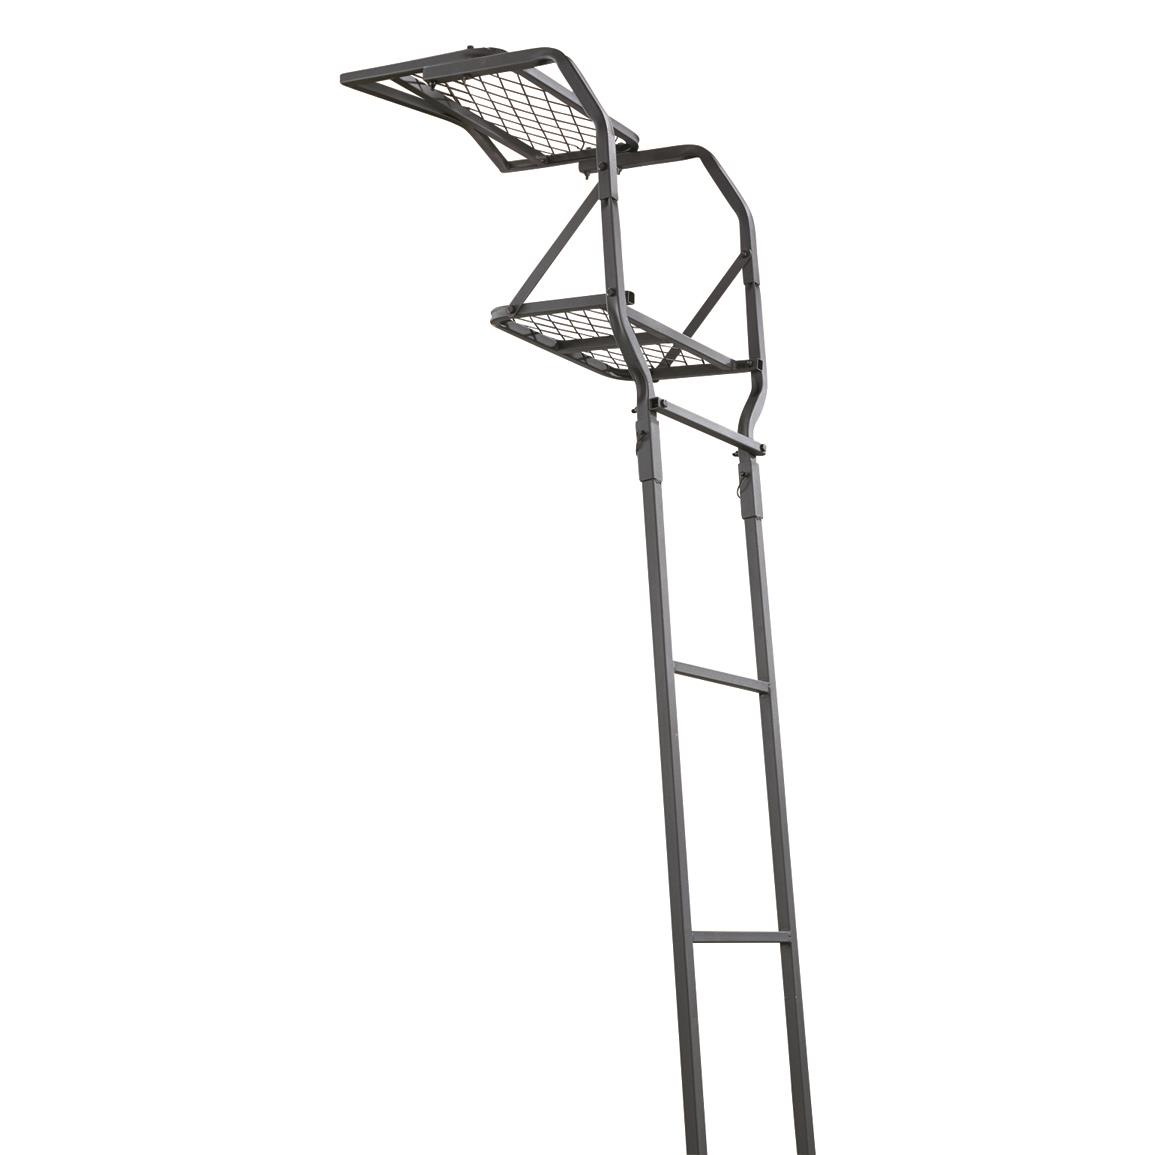 Guide Gear 15 Mesh Seat Ladder Tree Stand